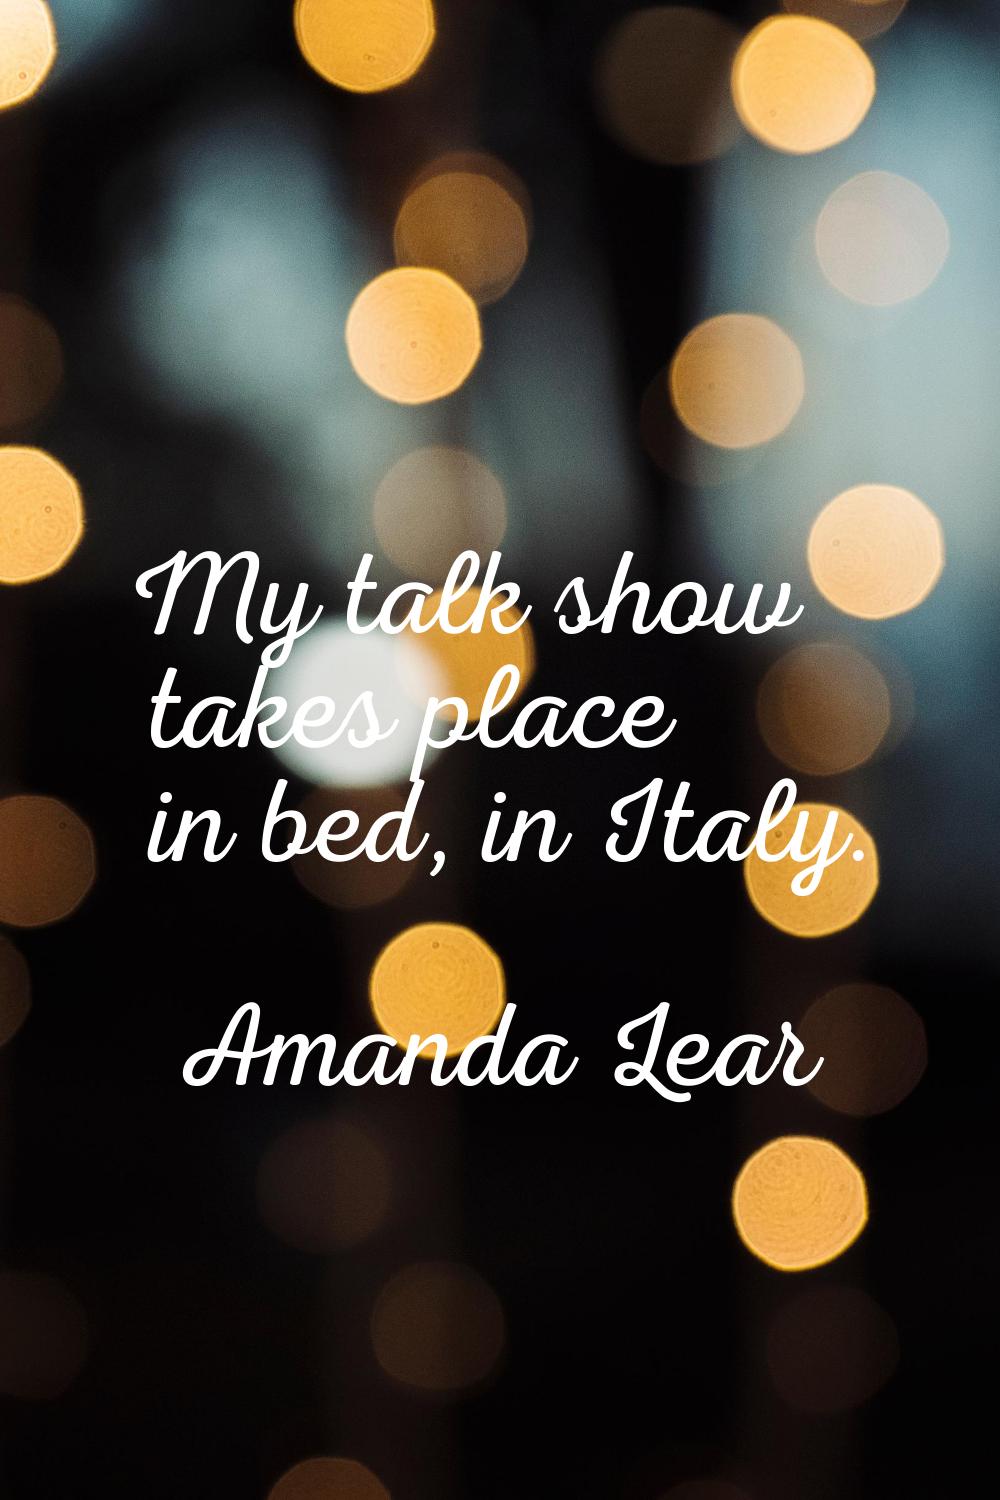 My talk show takes place in bed, in Italy.